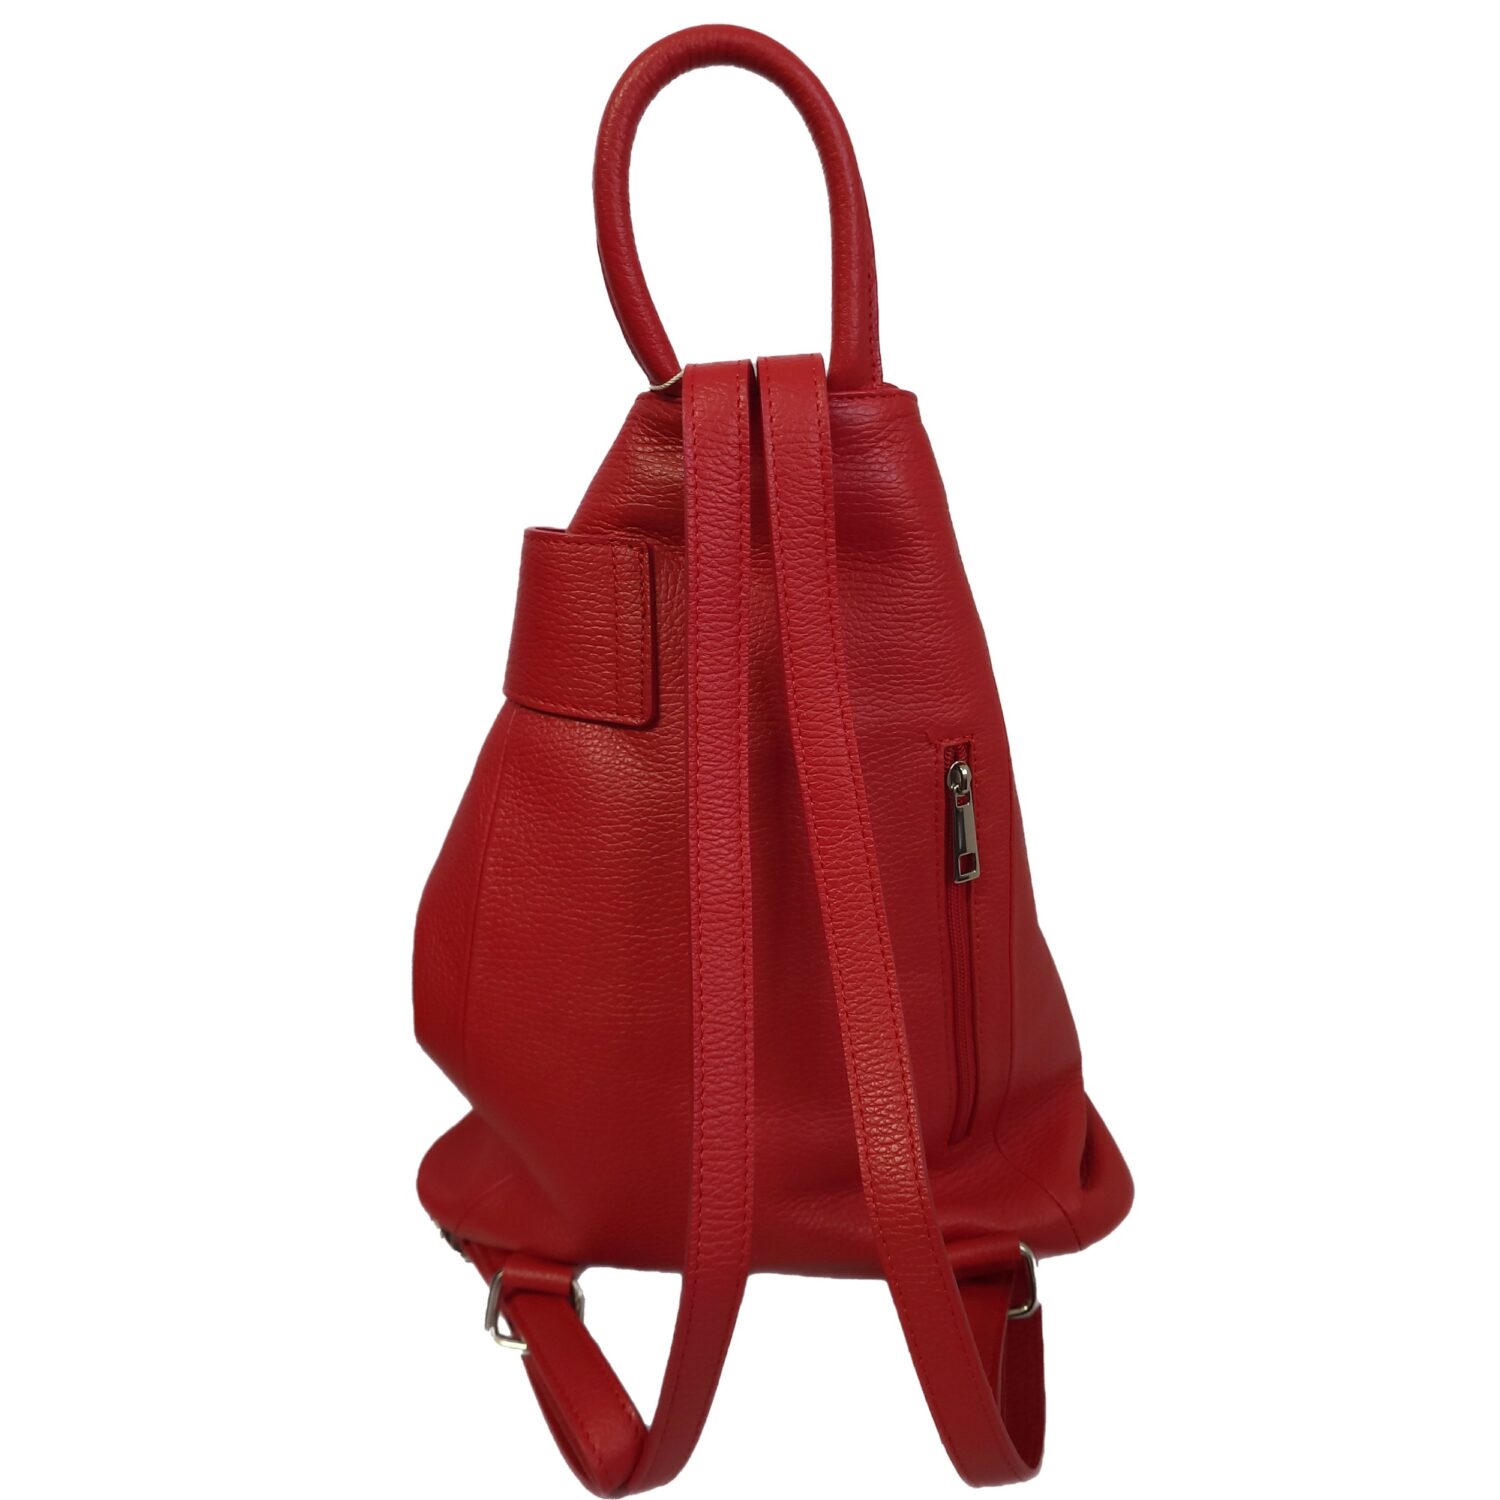 red leather backpack showing back view